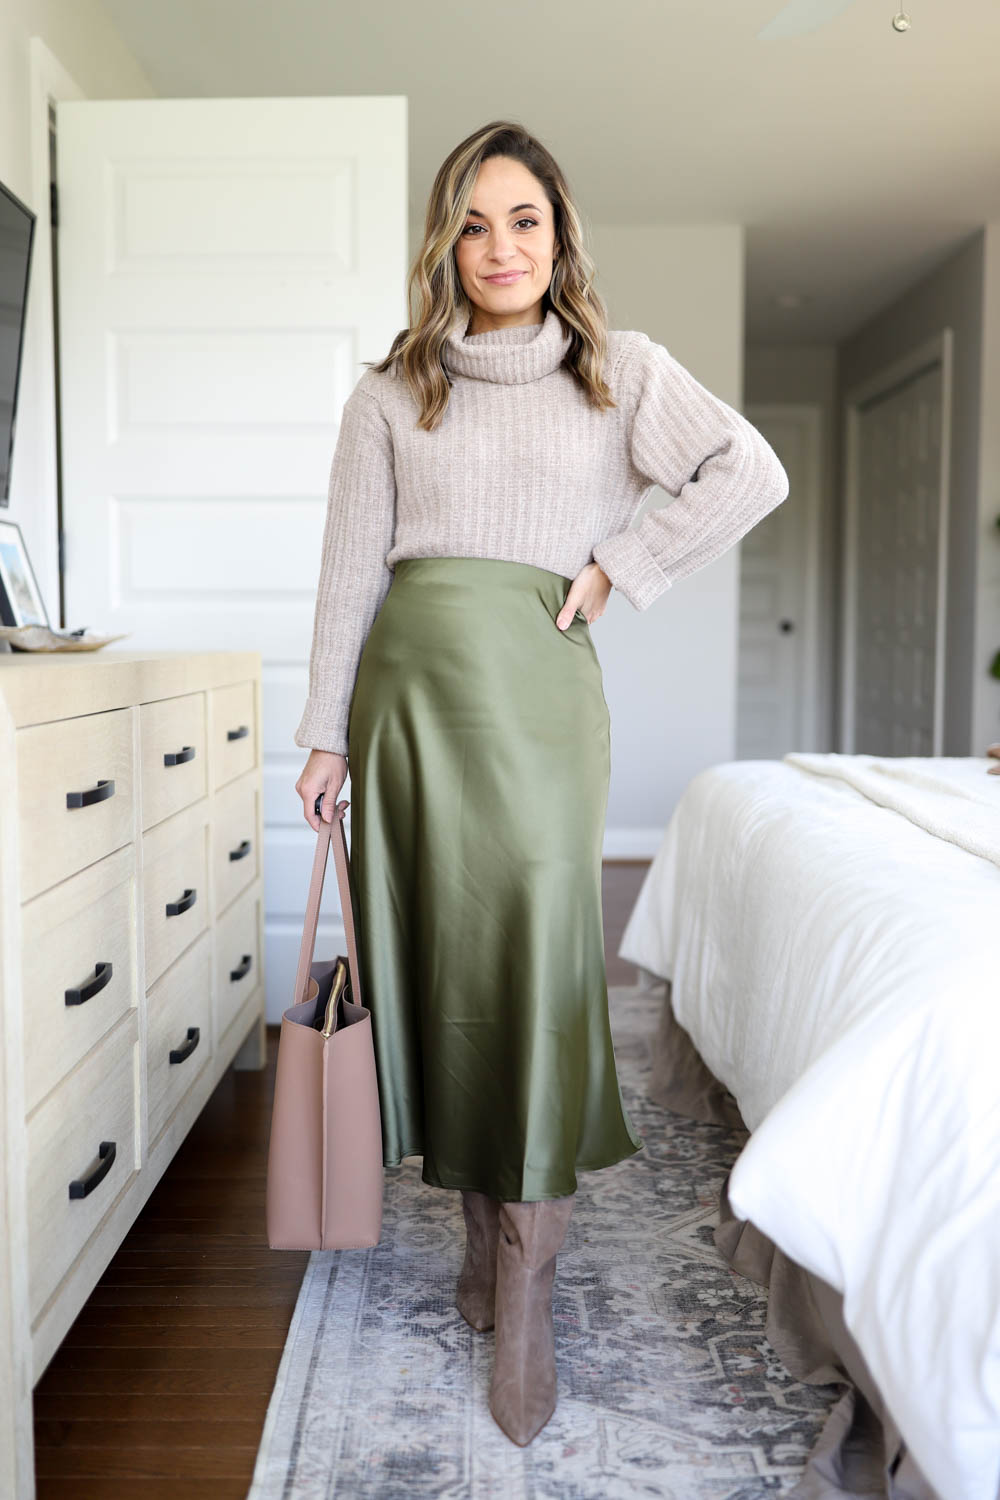 Petite-friendly outfits for work via pumps and push-ups blog | knee high boots outfits | petite fashion | petite blogger 